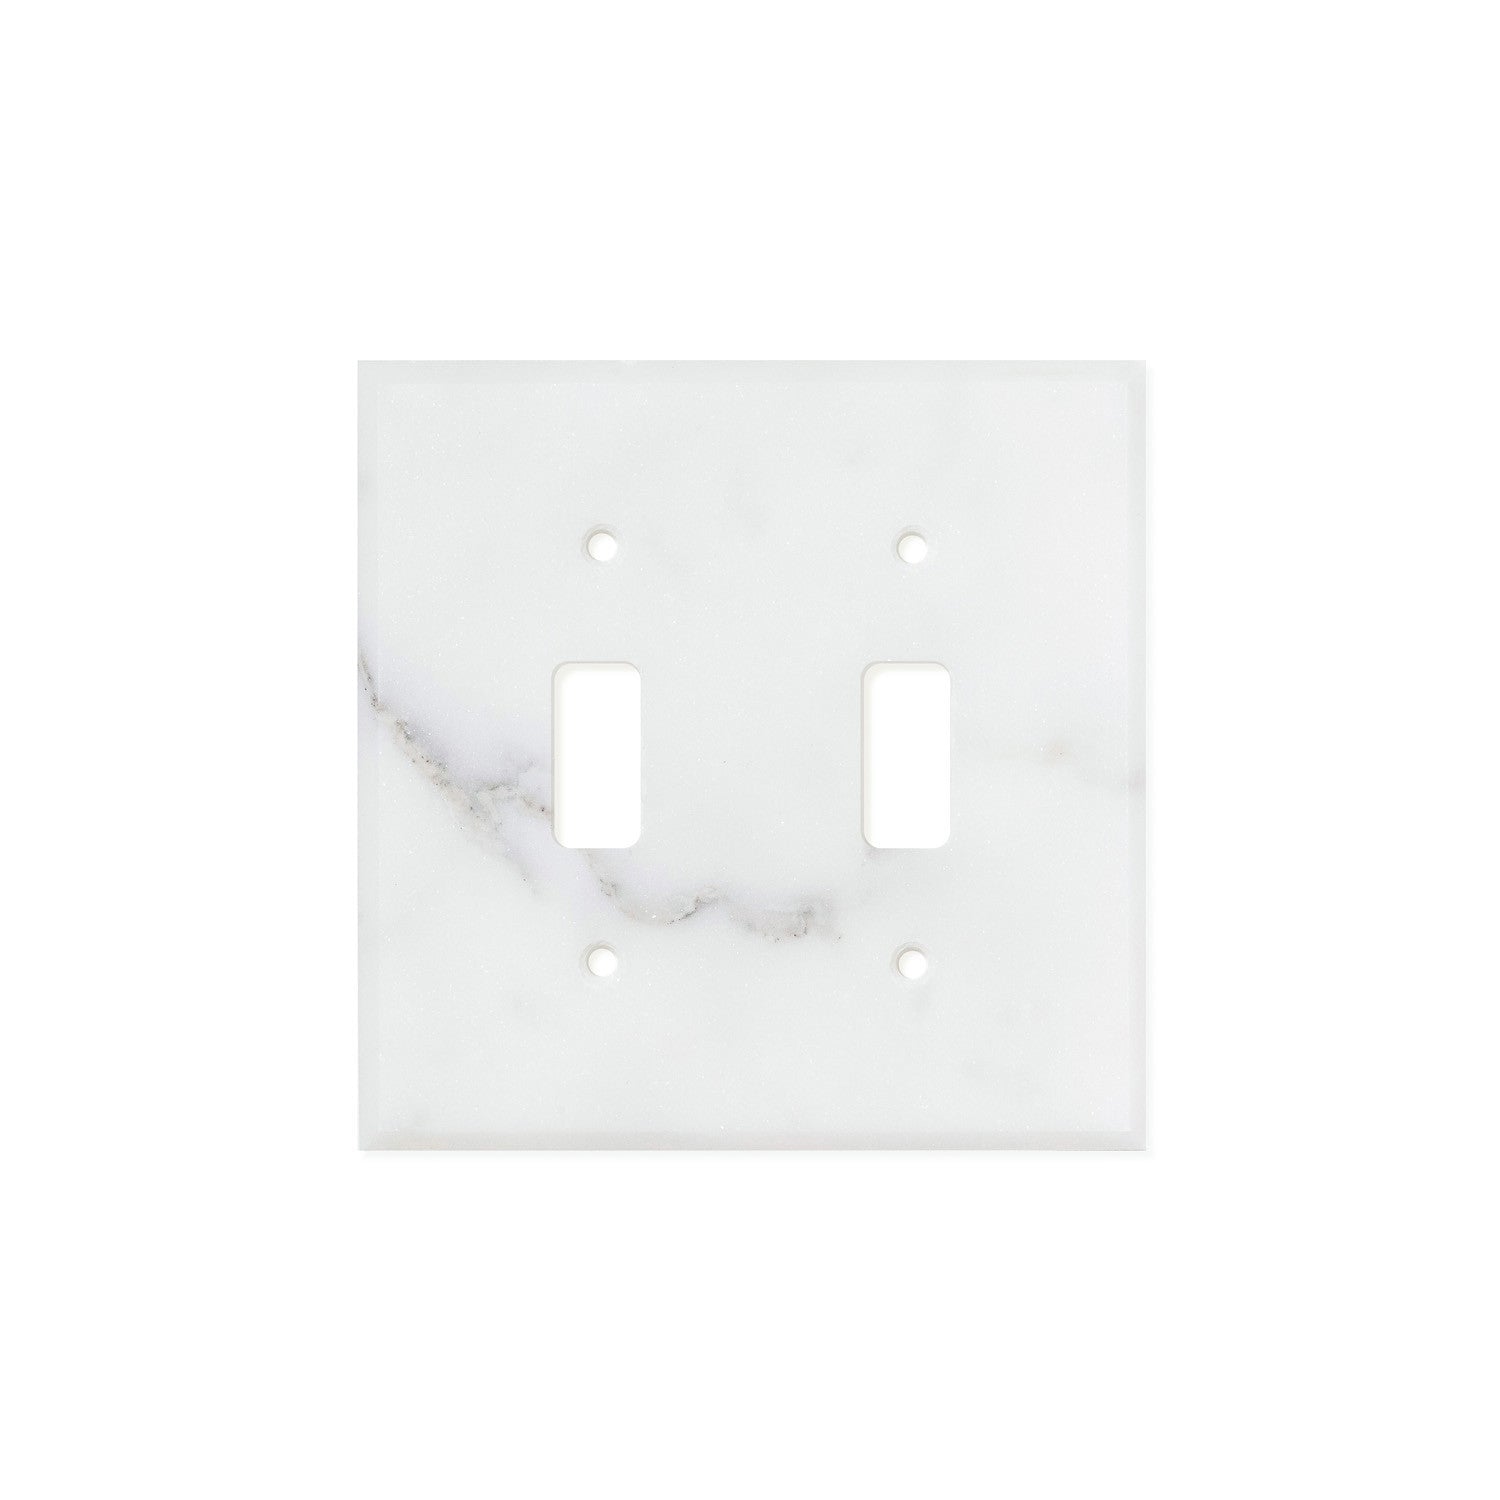 Calacatta Gold Marble Switch Plate Cover, Honed (2 TOGGLE) - Tilephile